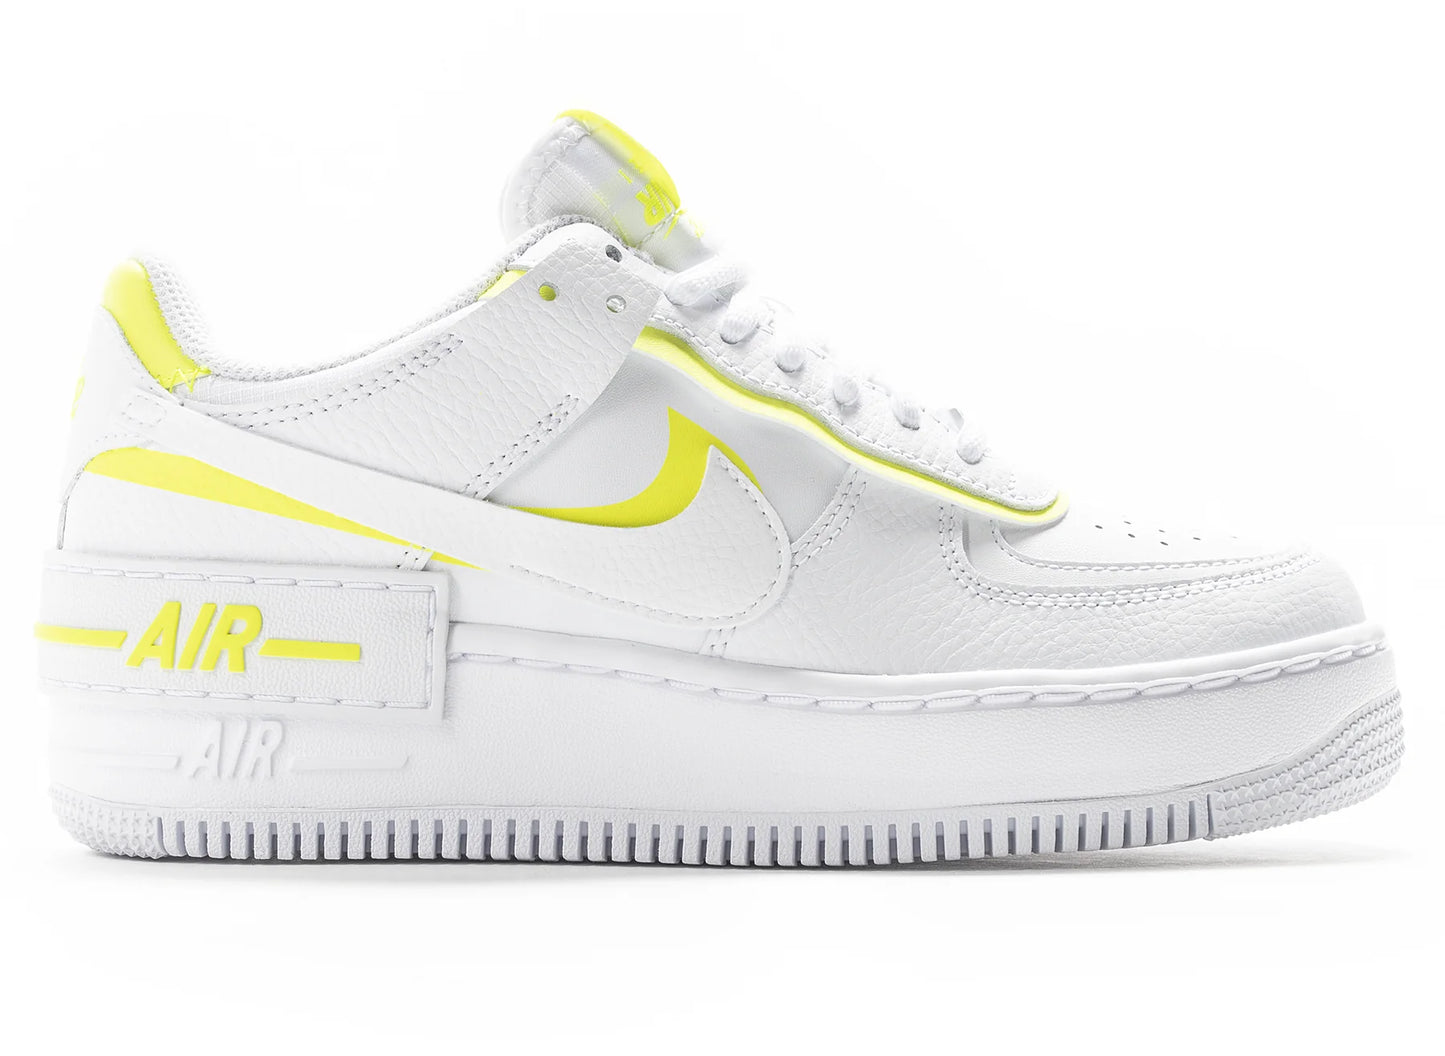 Nike Air Force 1 Shadow Parcel Shoes for Women (White/Lemon)